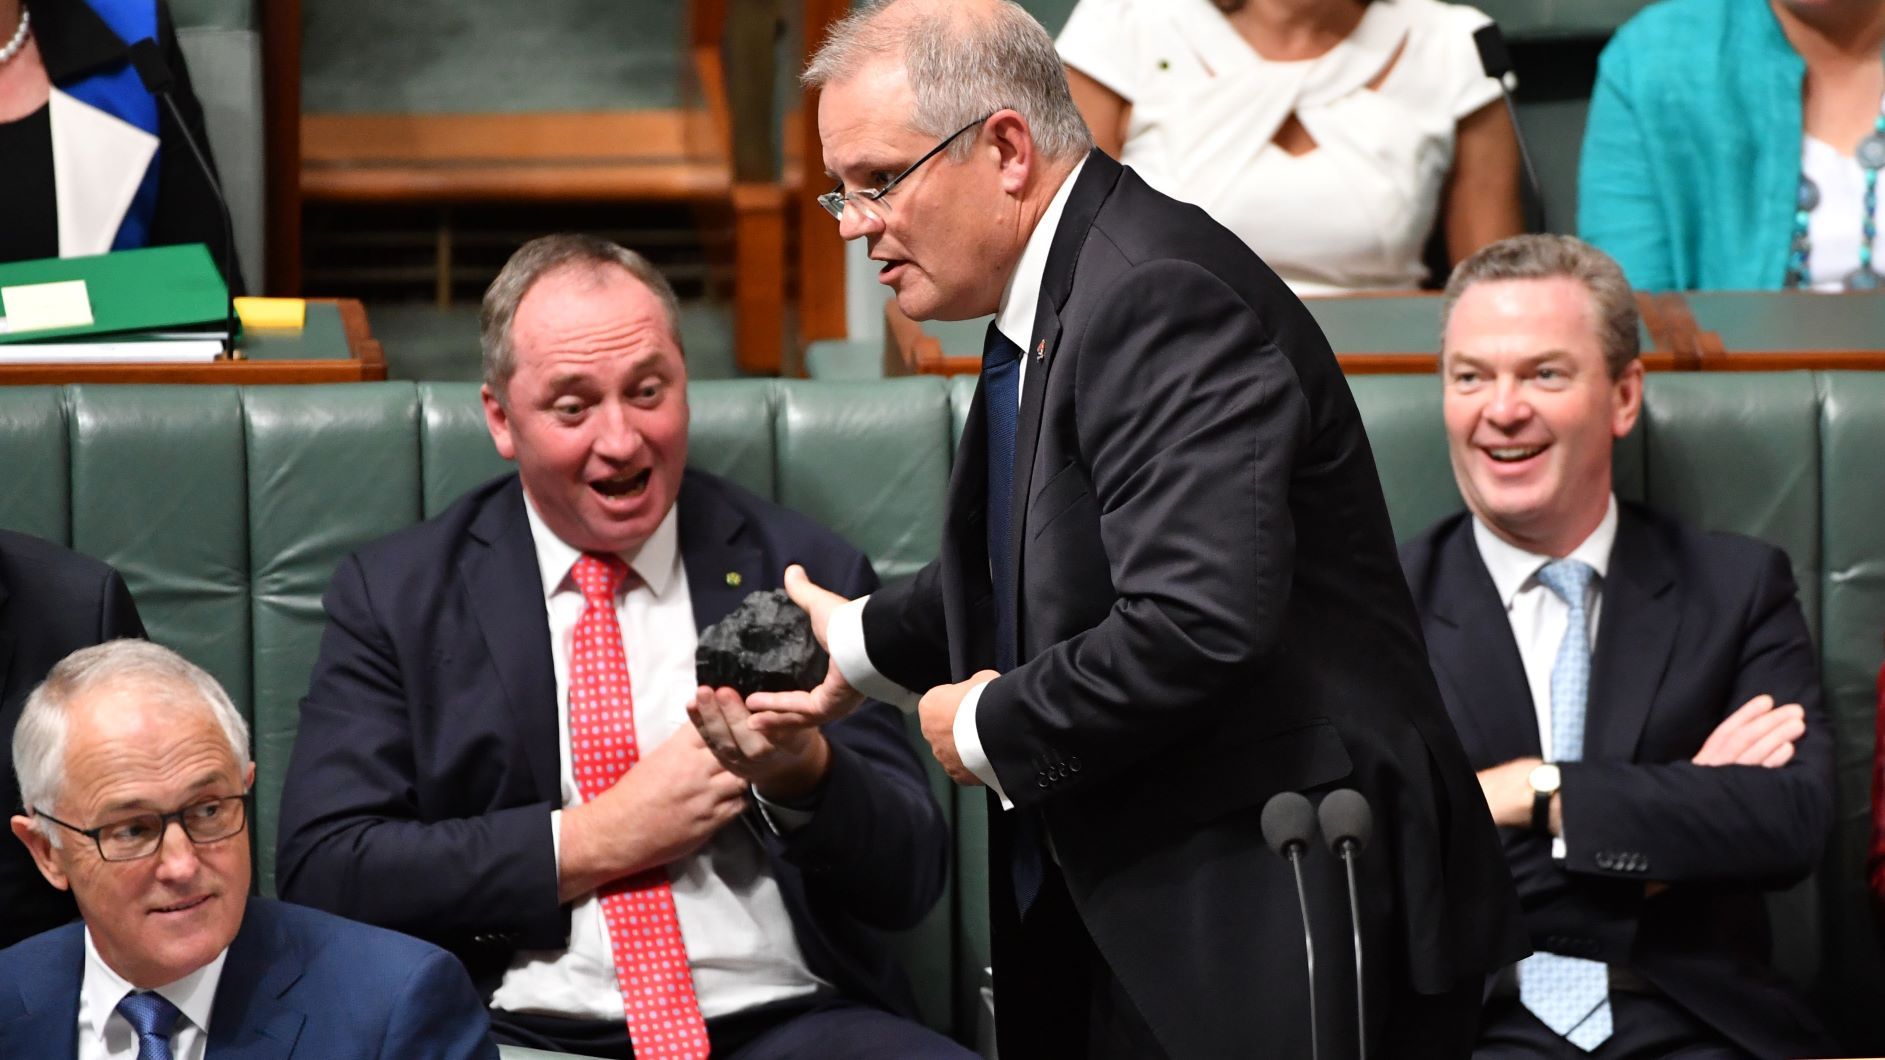 Treasurer Scott Morrison hands Deputy Prime Minister Barnaby Joyce a lump of coal during Question Time at Parliament House 